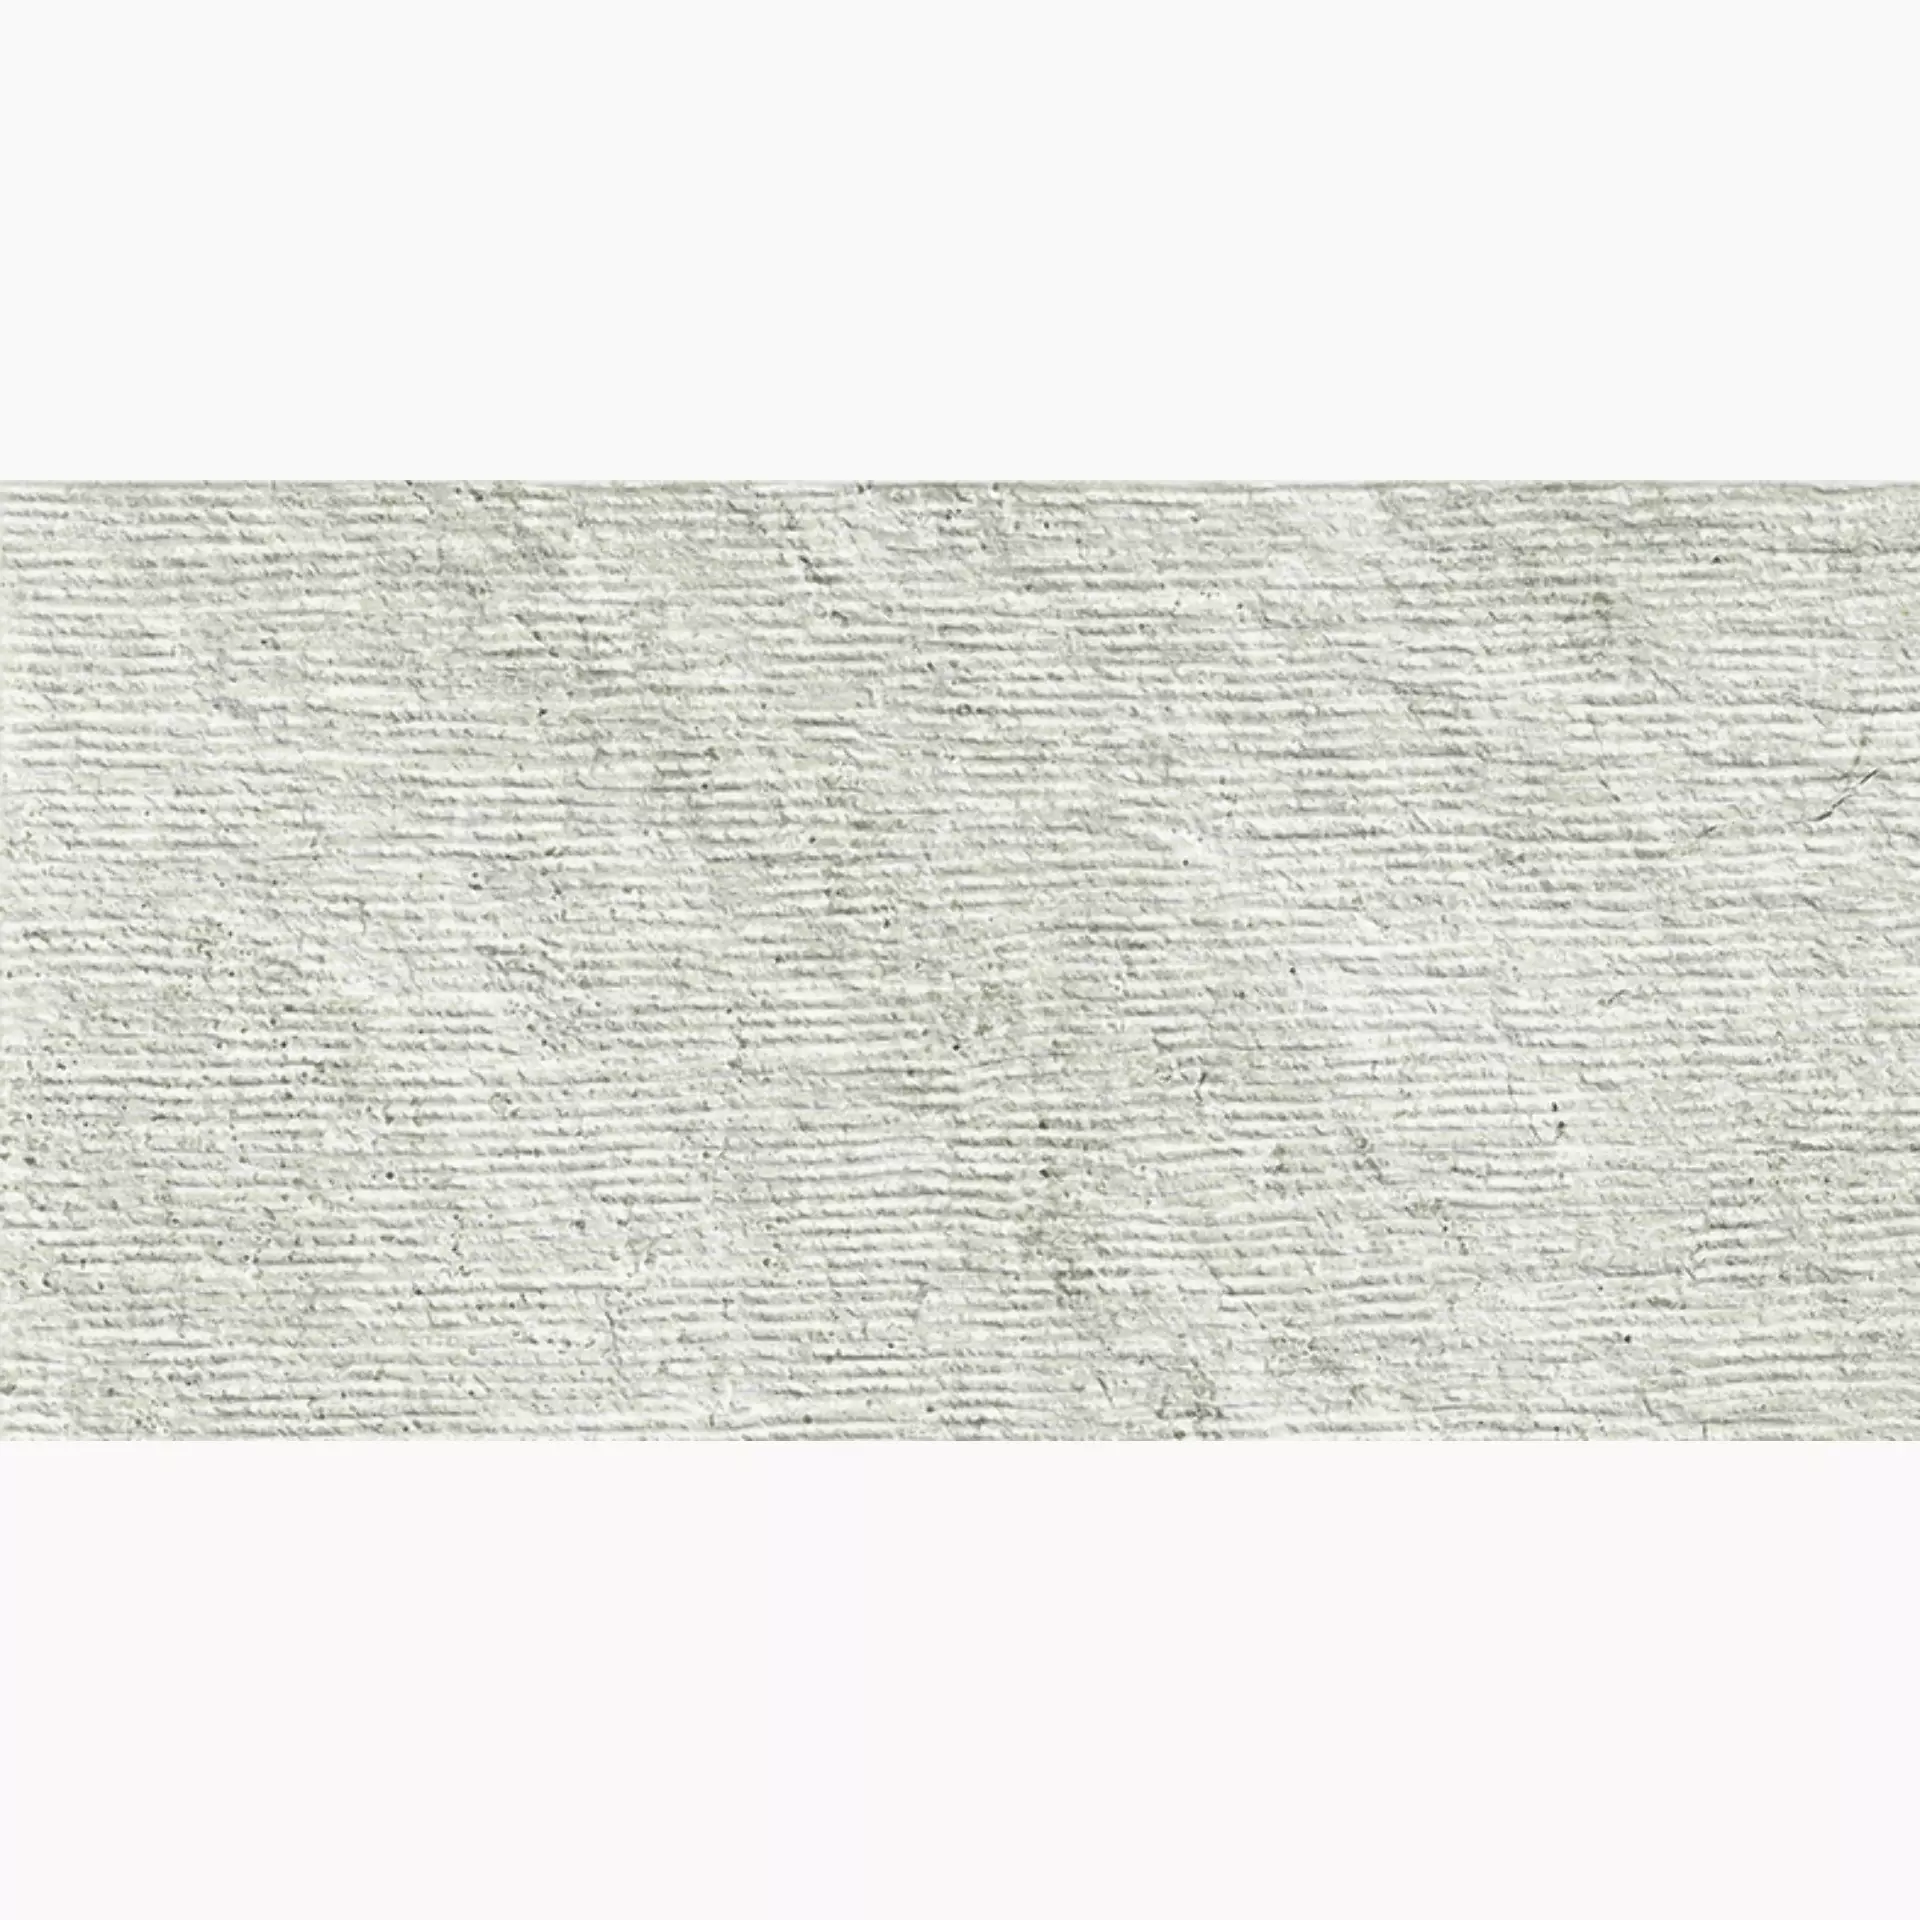 Provenza Unique Travertine Ruled Silver Naturale EJ97 30x60cm rectified 9,5mm